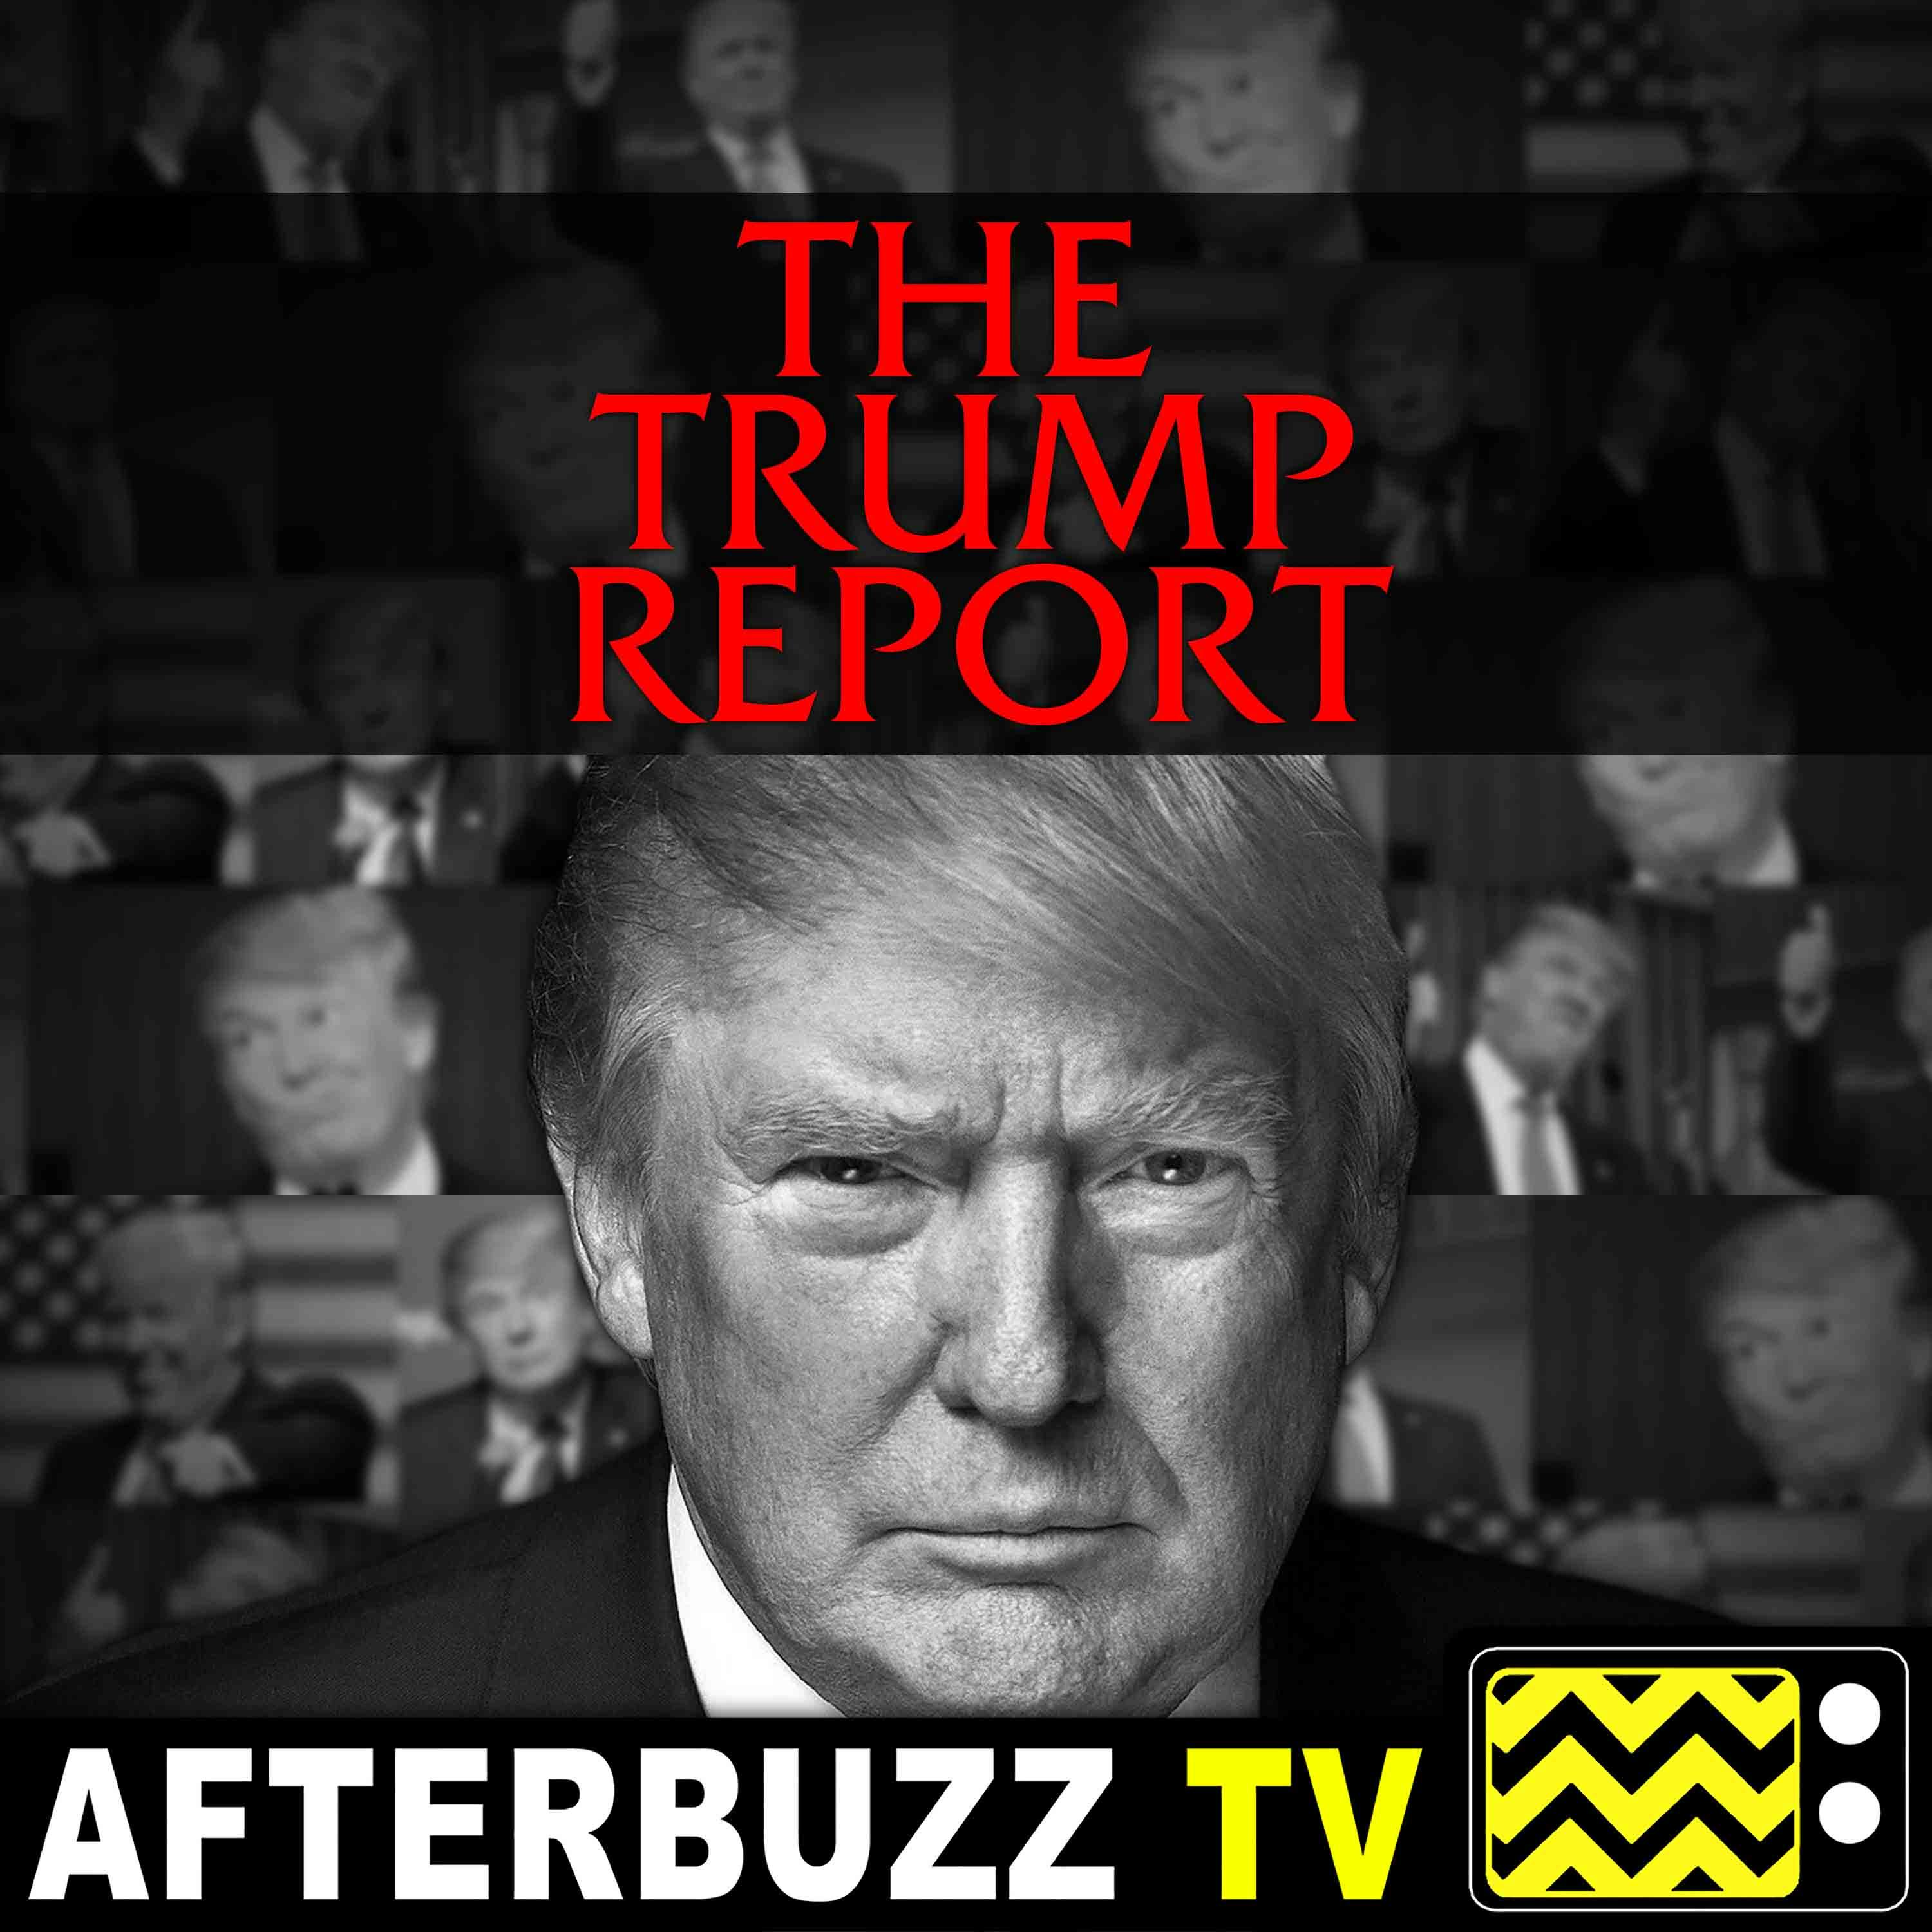 The Trump Report | International Man of Misery | AfterBuzz TV